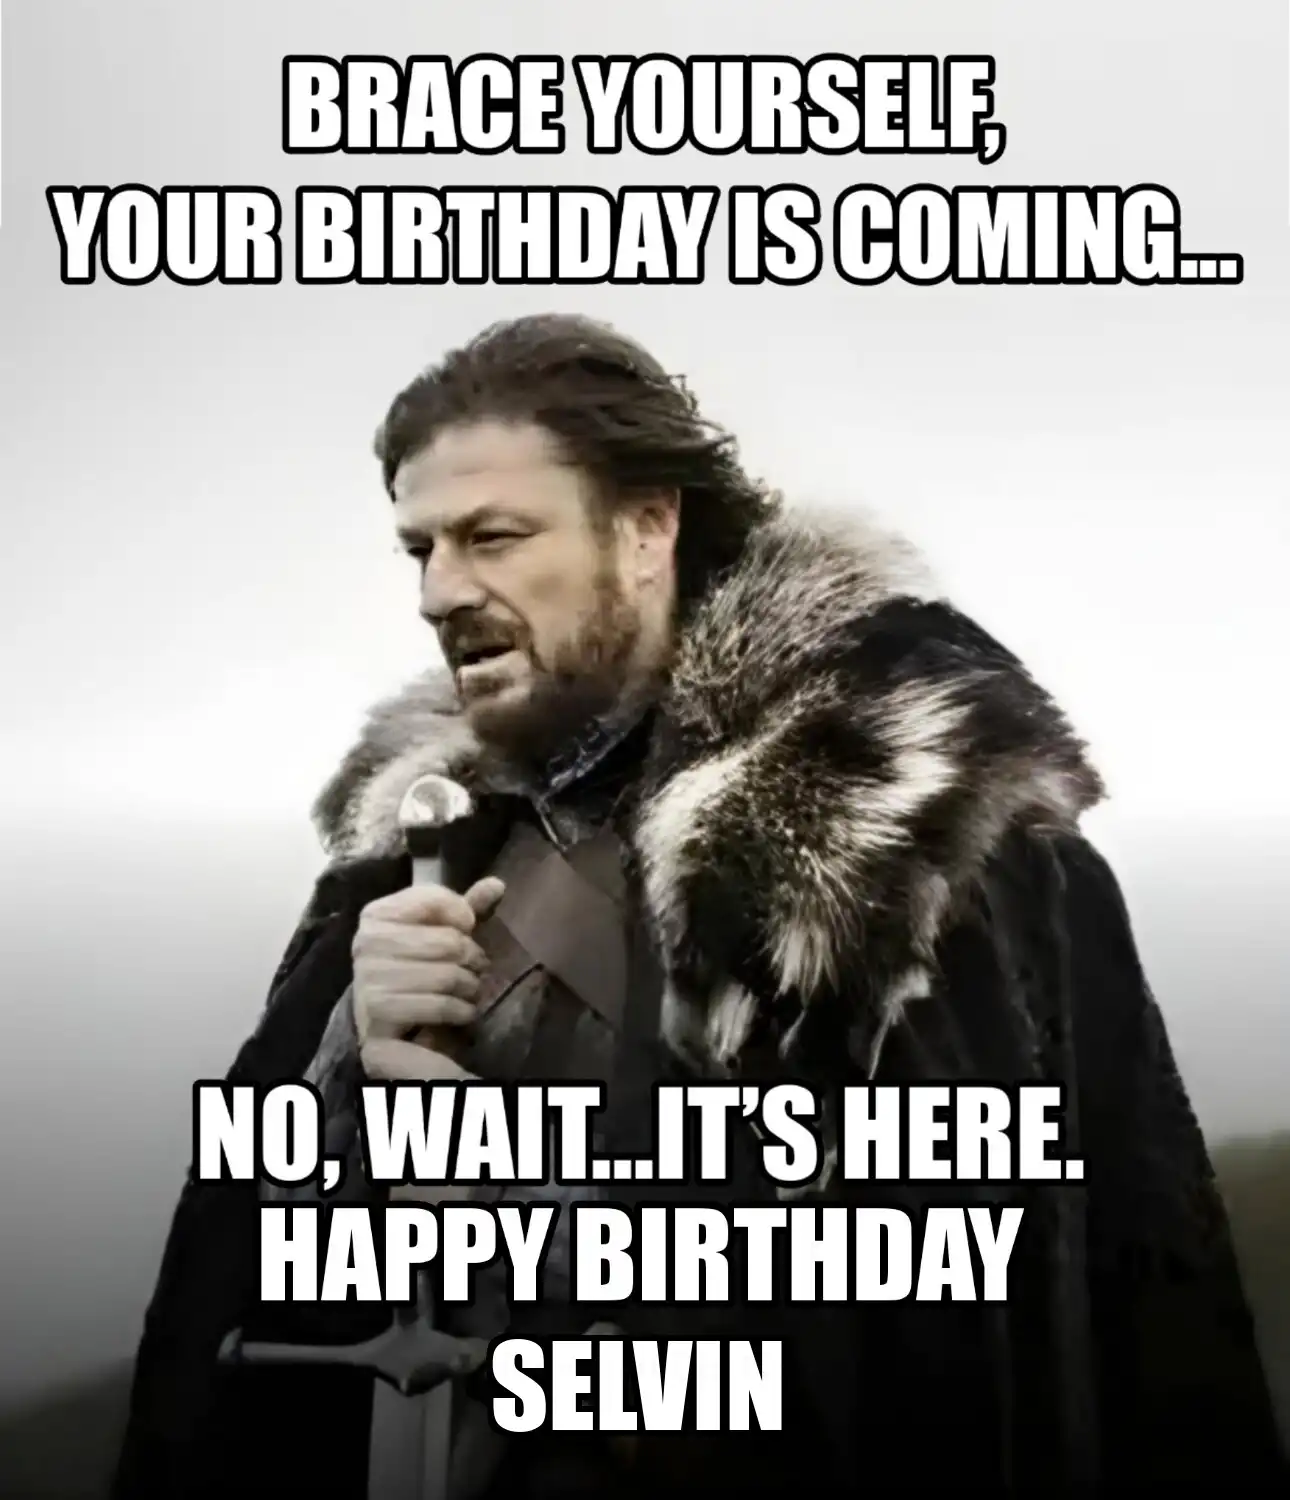 Happy Birthday Selvin Brace Yourself Your Birthday Is Coming Meme